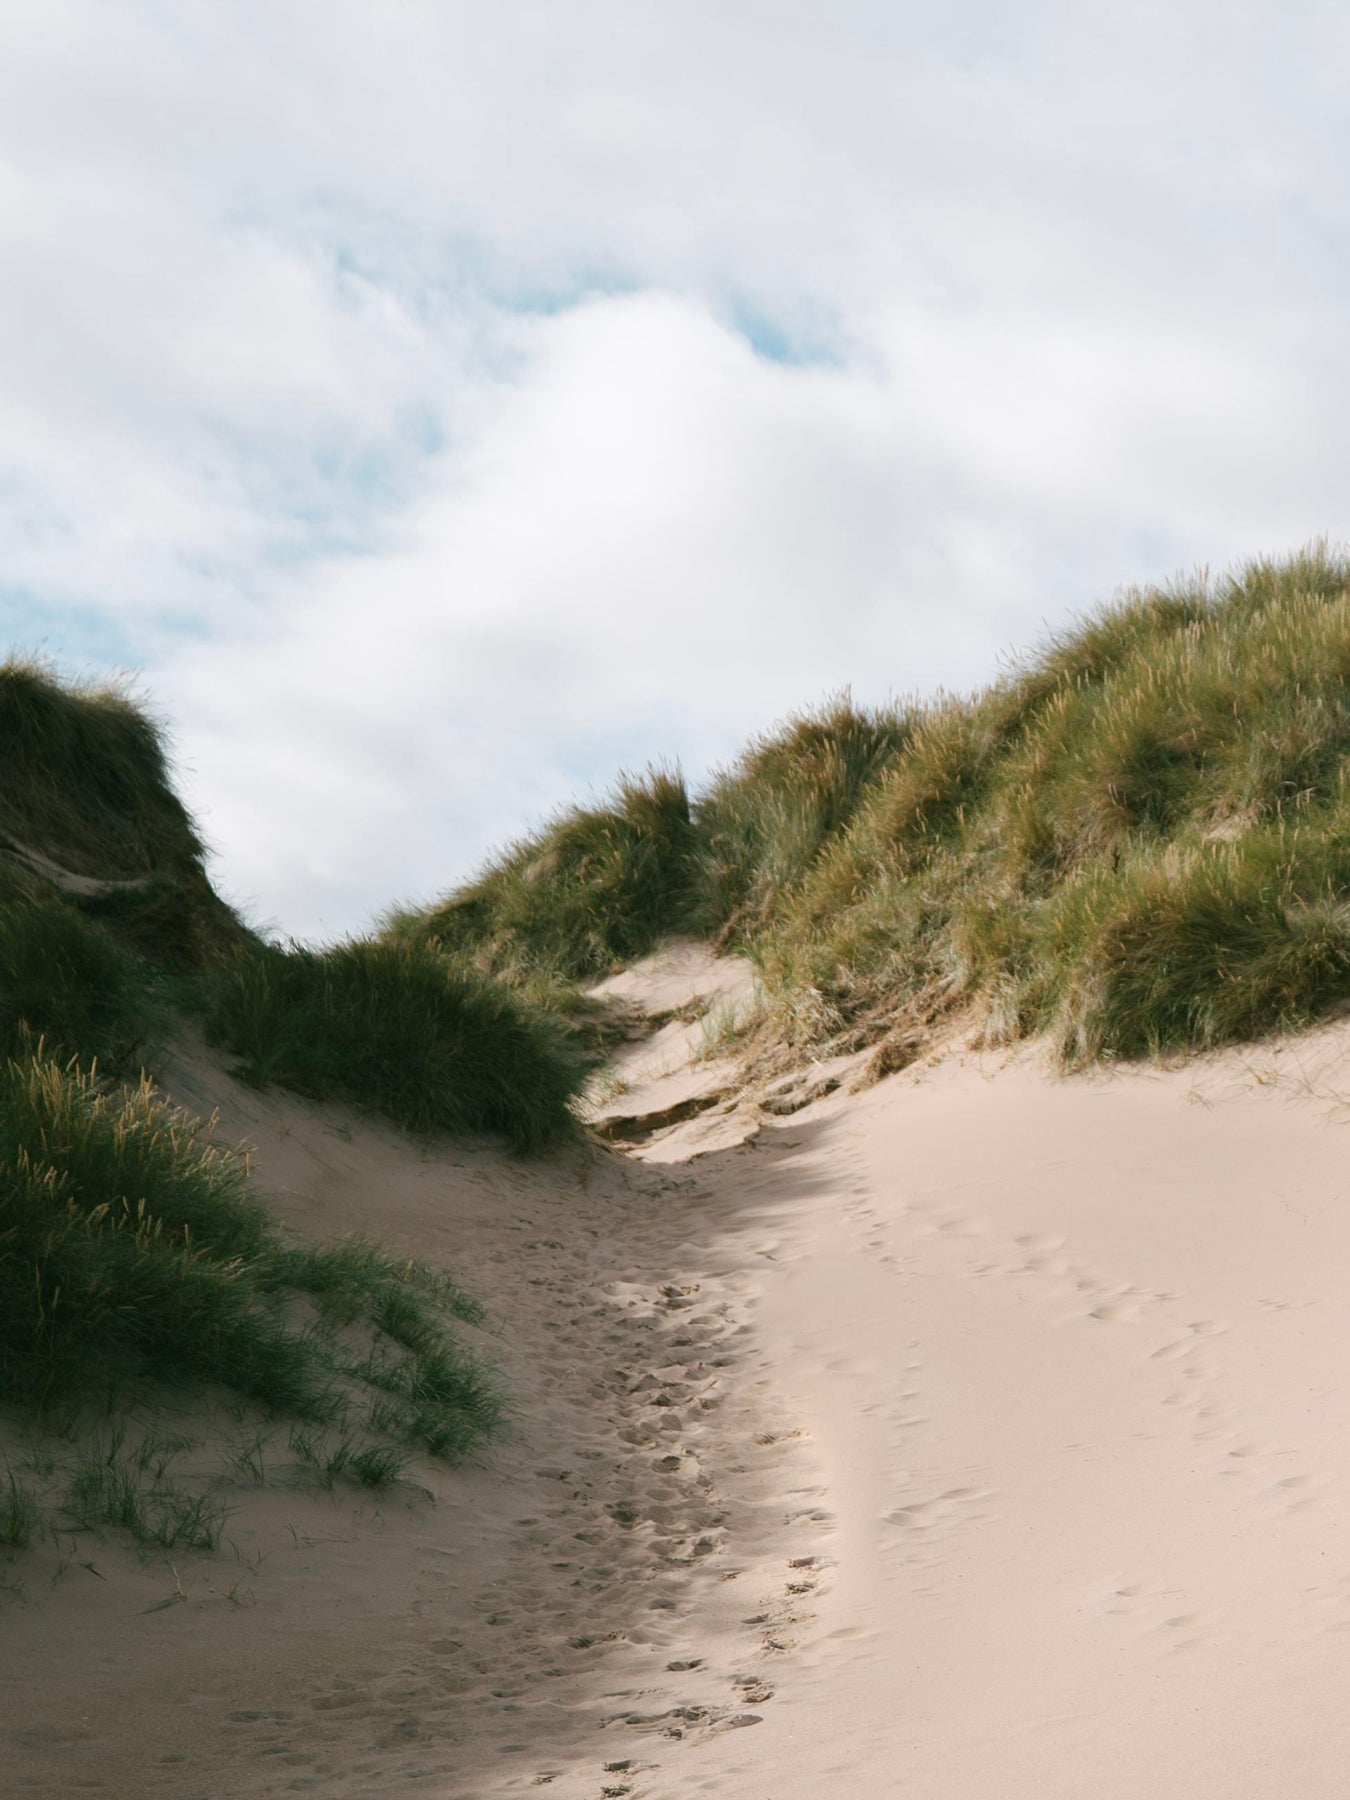 A sandy beach at Tyninghame, Scotland, which inspired the candle by KESTIN.